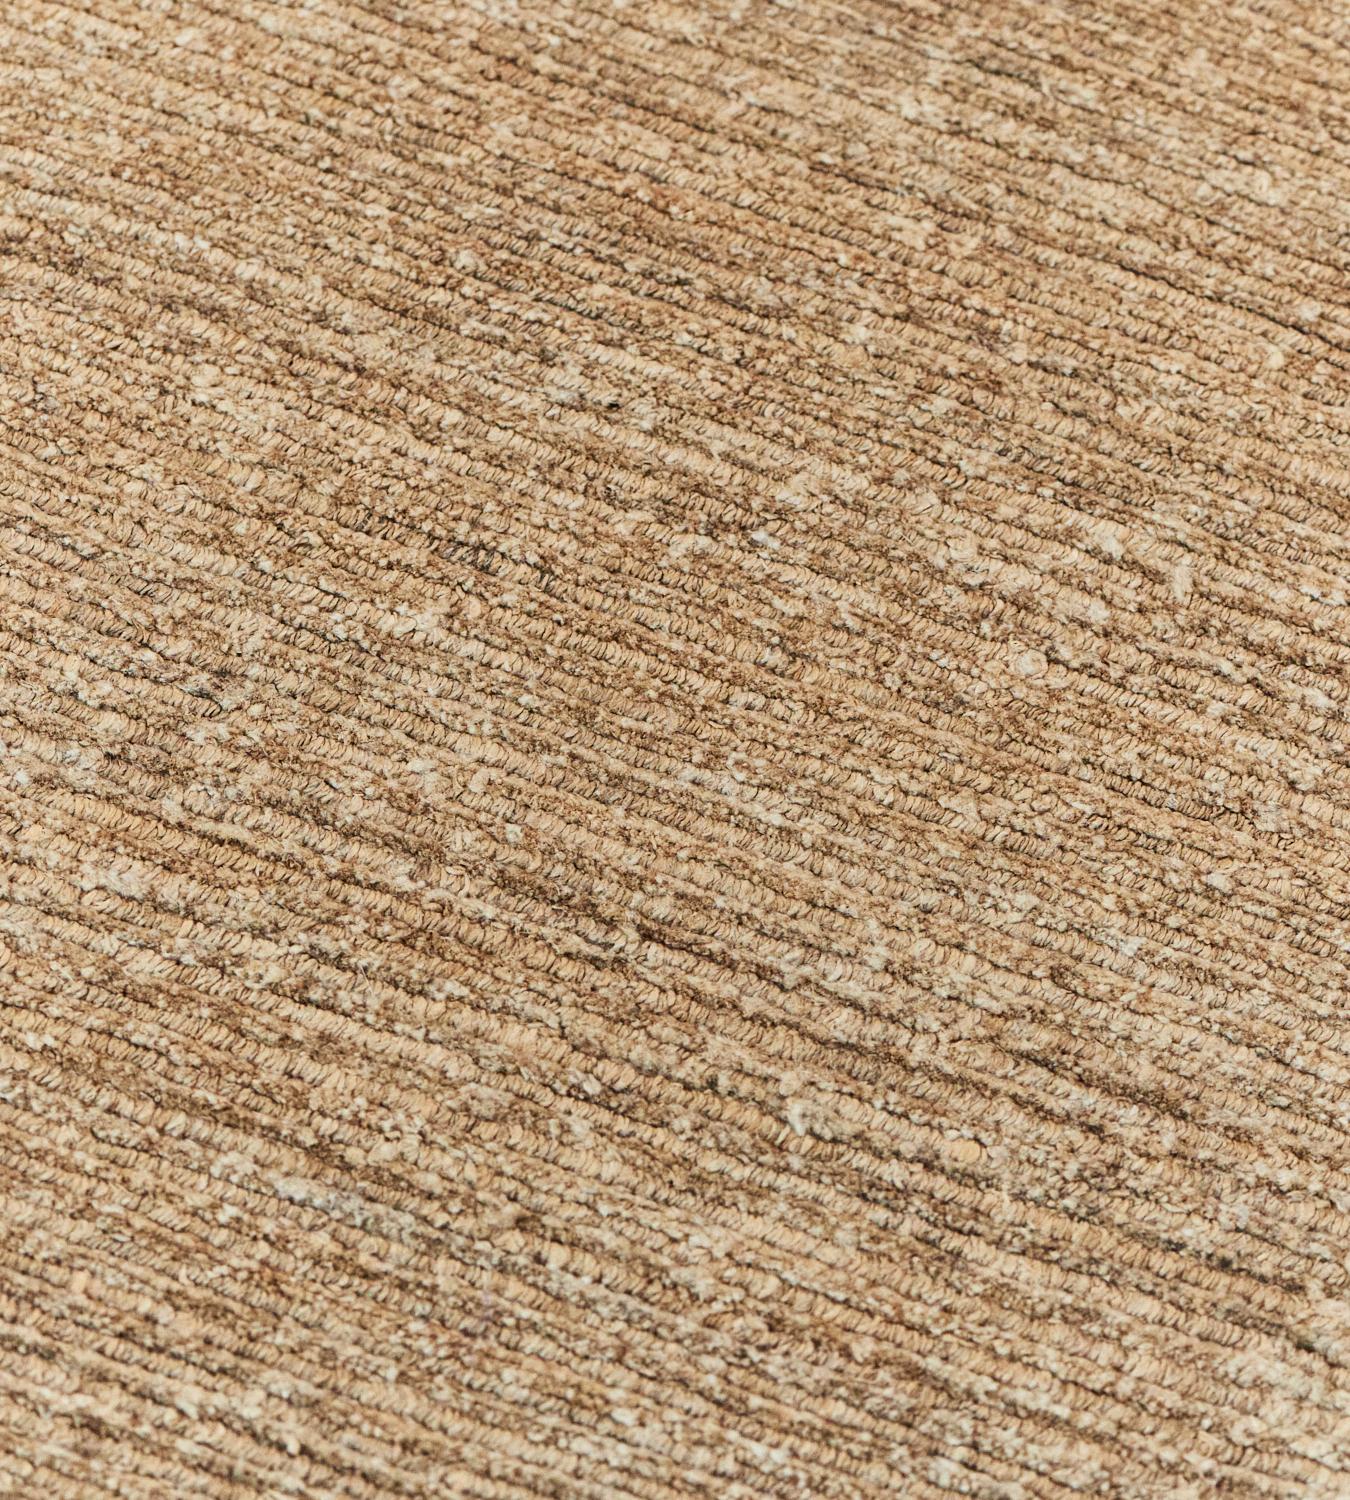 Handwoven Hemp All-Natural Rug In New Condition For Sale In West Hollywood, CA